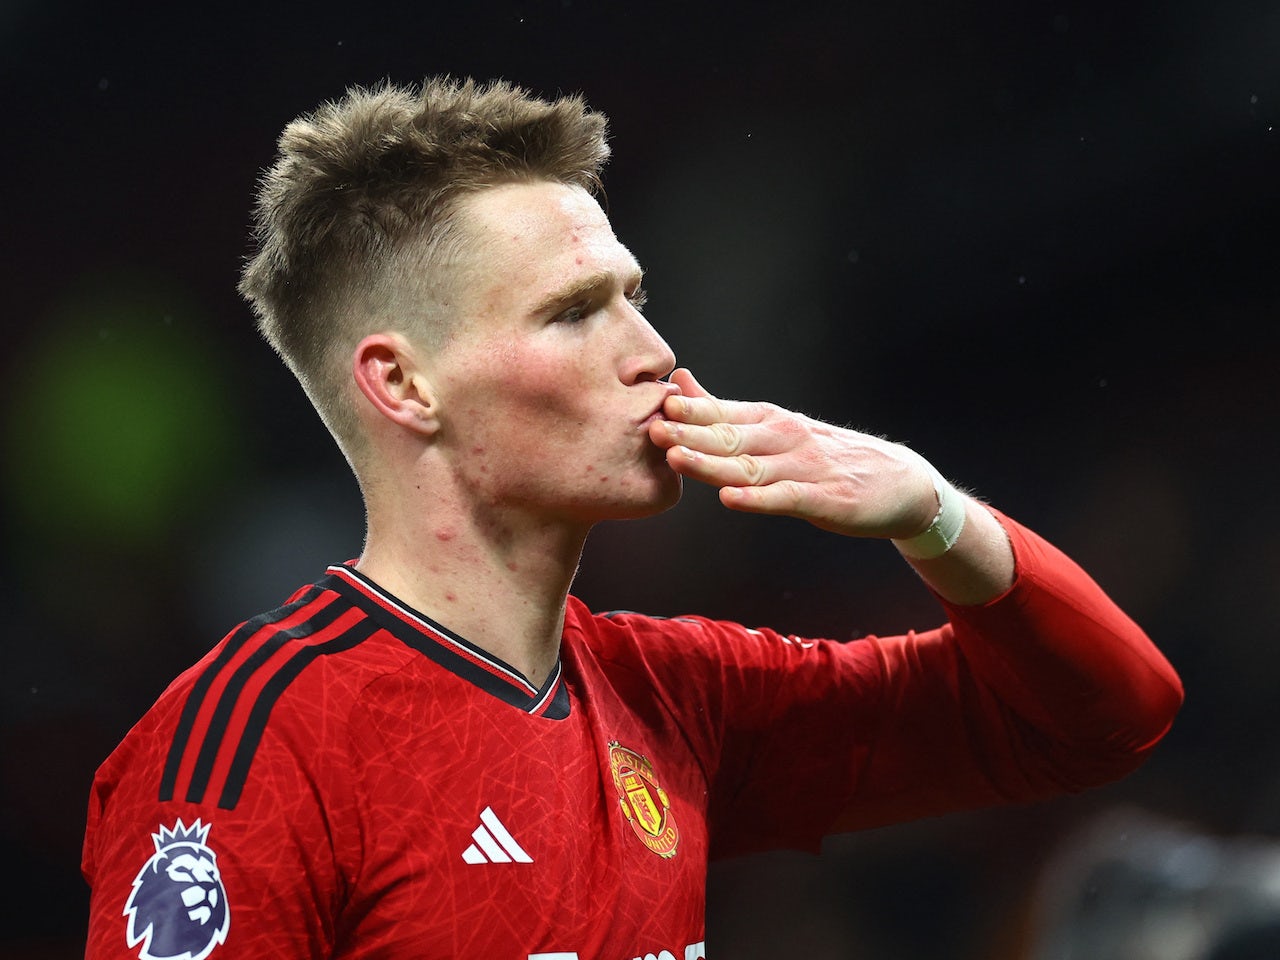 Man United transfer news: Scott McTominay 'wanted' by four Premier League clubs